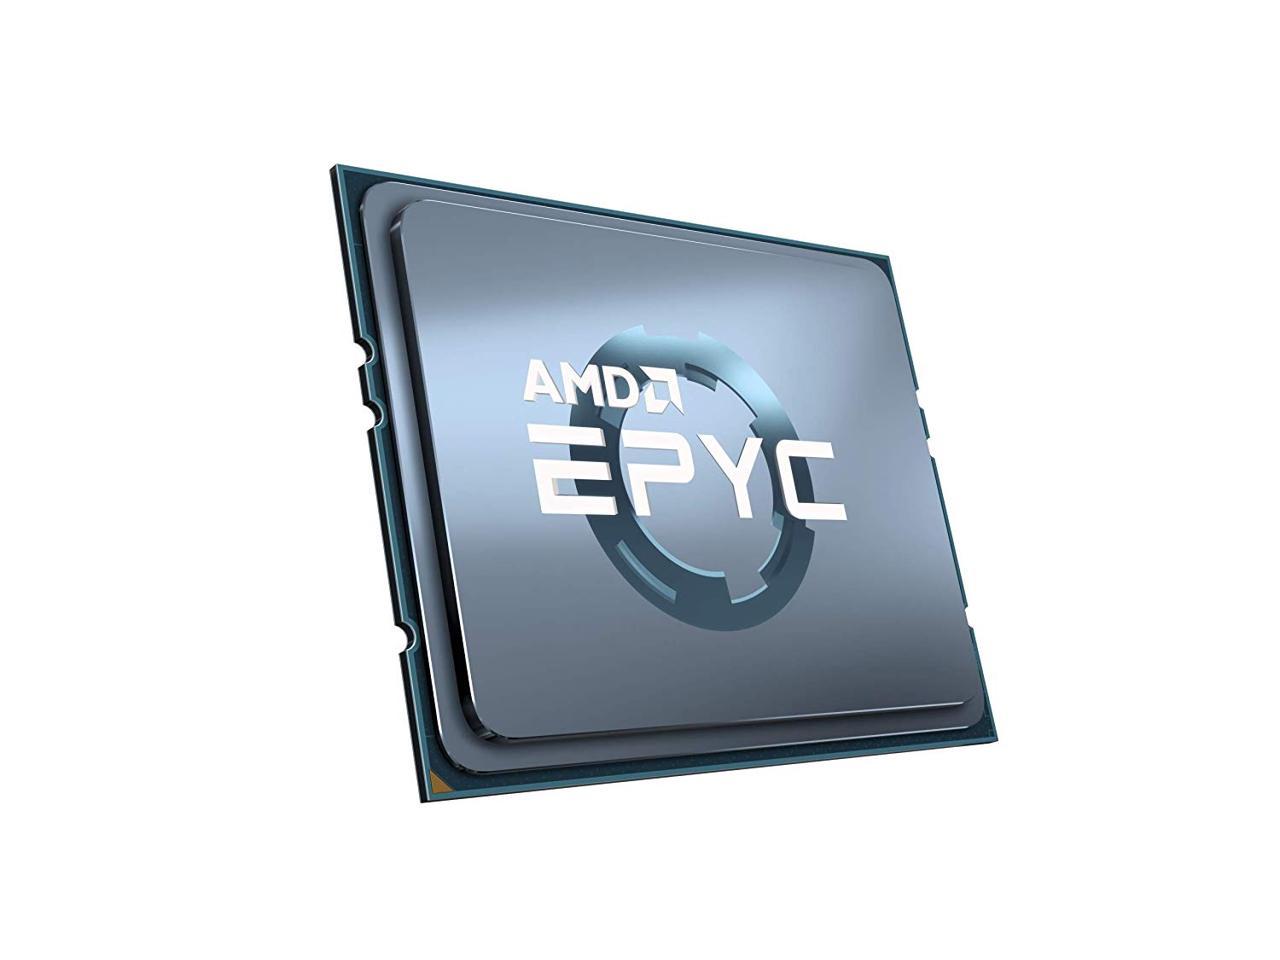 AMD PS7301BEAFWOF EPYC x86 CPU Model 7301 (16c/32t 2.2GHz) 16 DDR4 DIMM Slots with up to 2TB RAM and 128 Lanes of PCIe